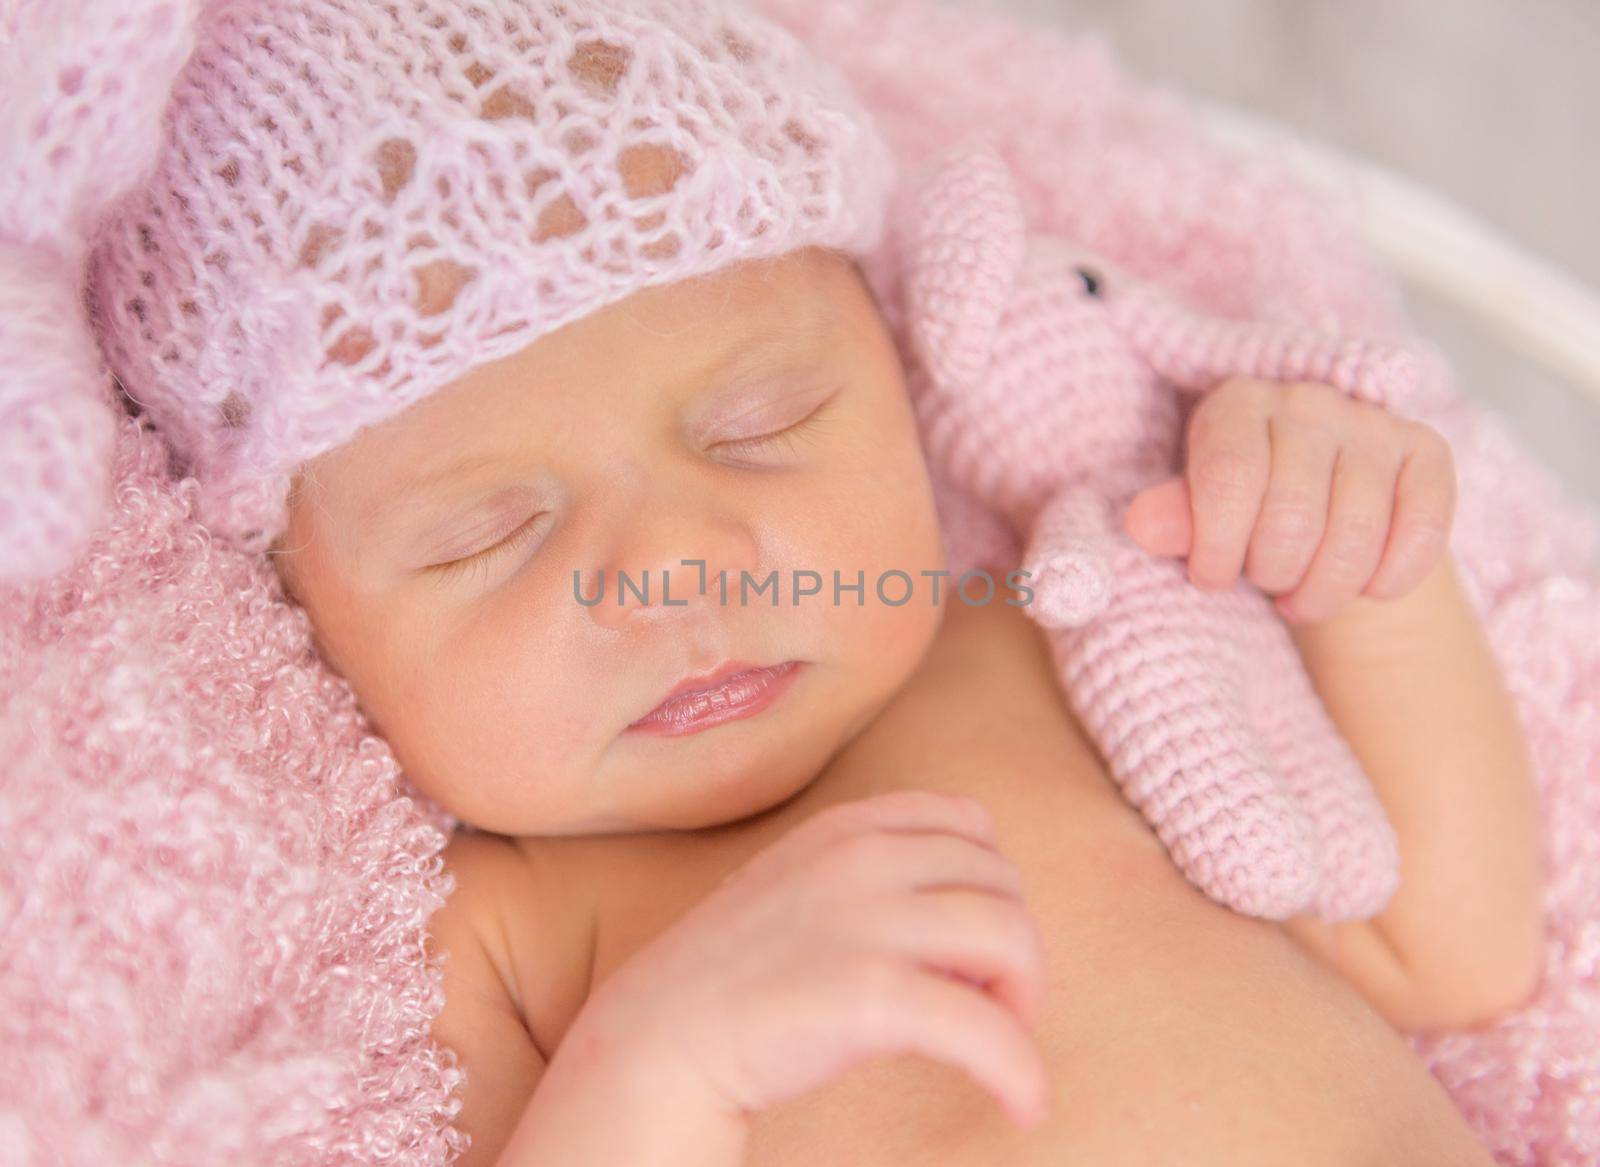 lovely newborn girl in pink panties and hat, with toy in basket on wooden background, top view